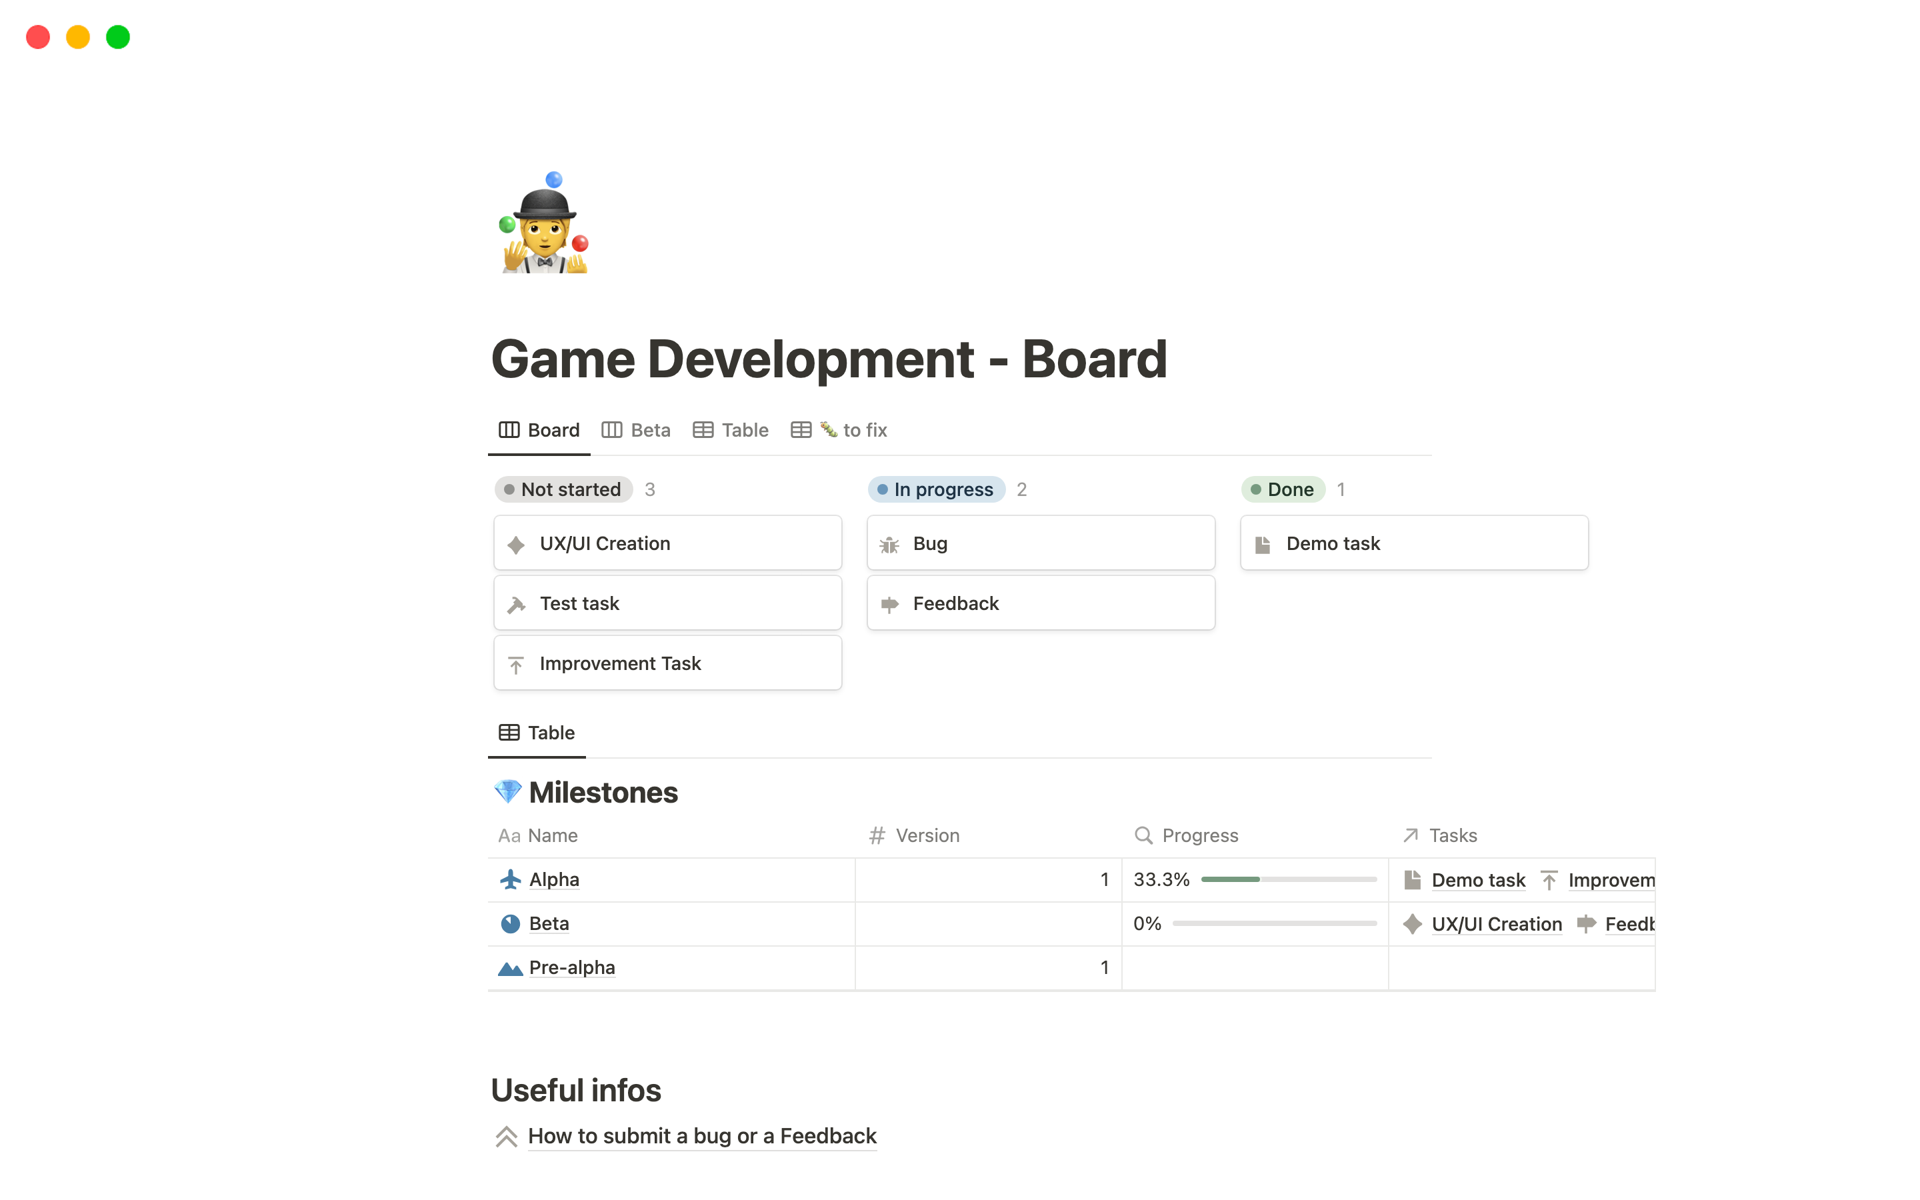 Ready to develop your game? Here is your one and only game development board.